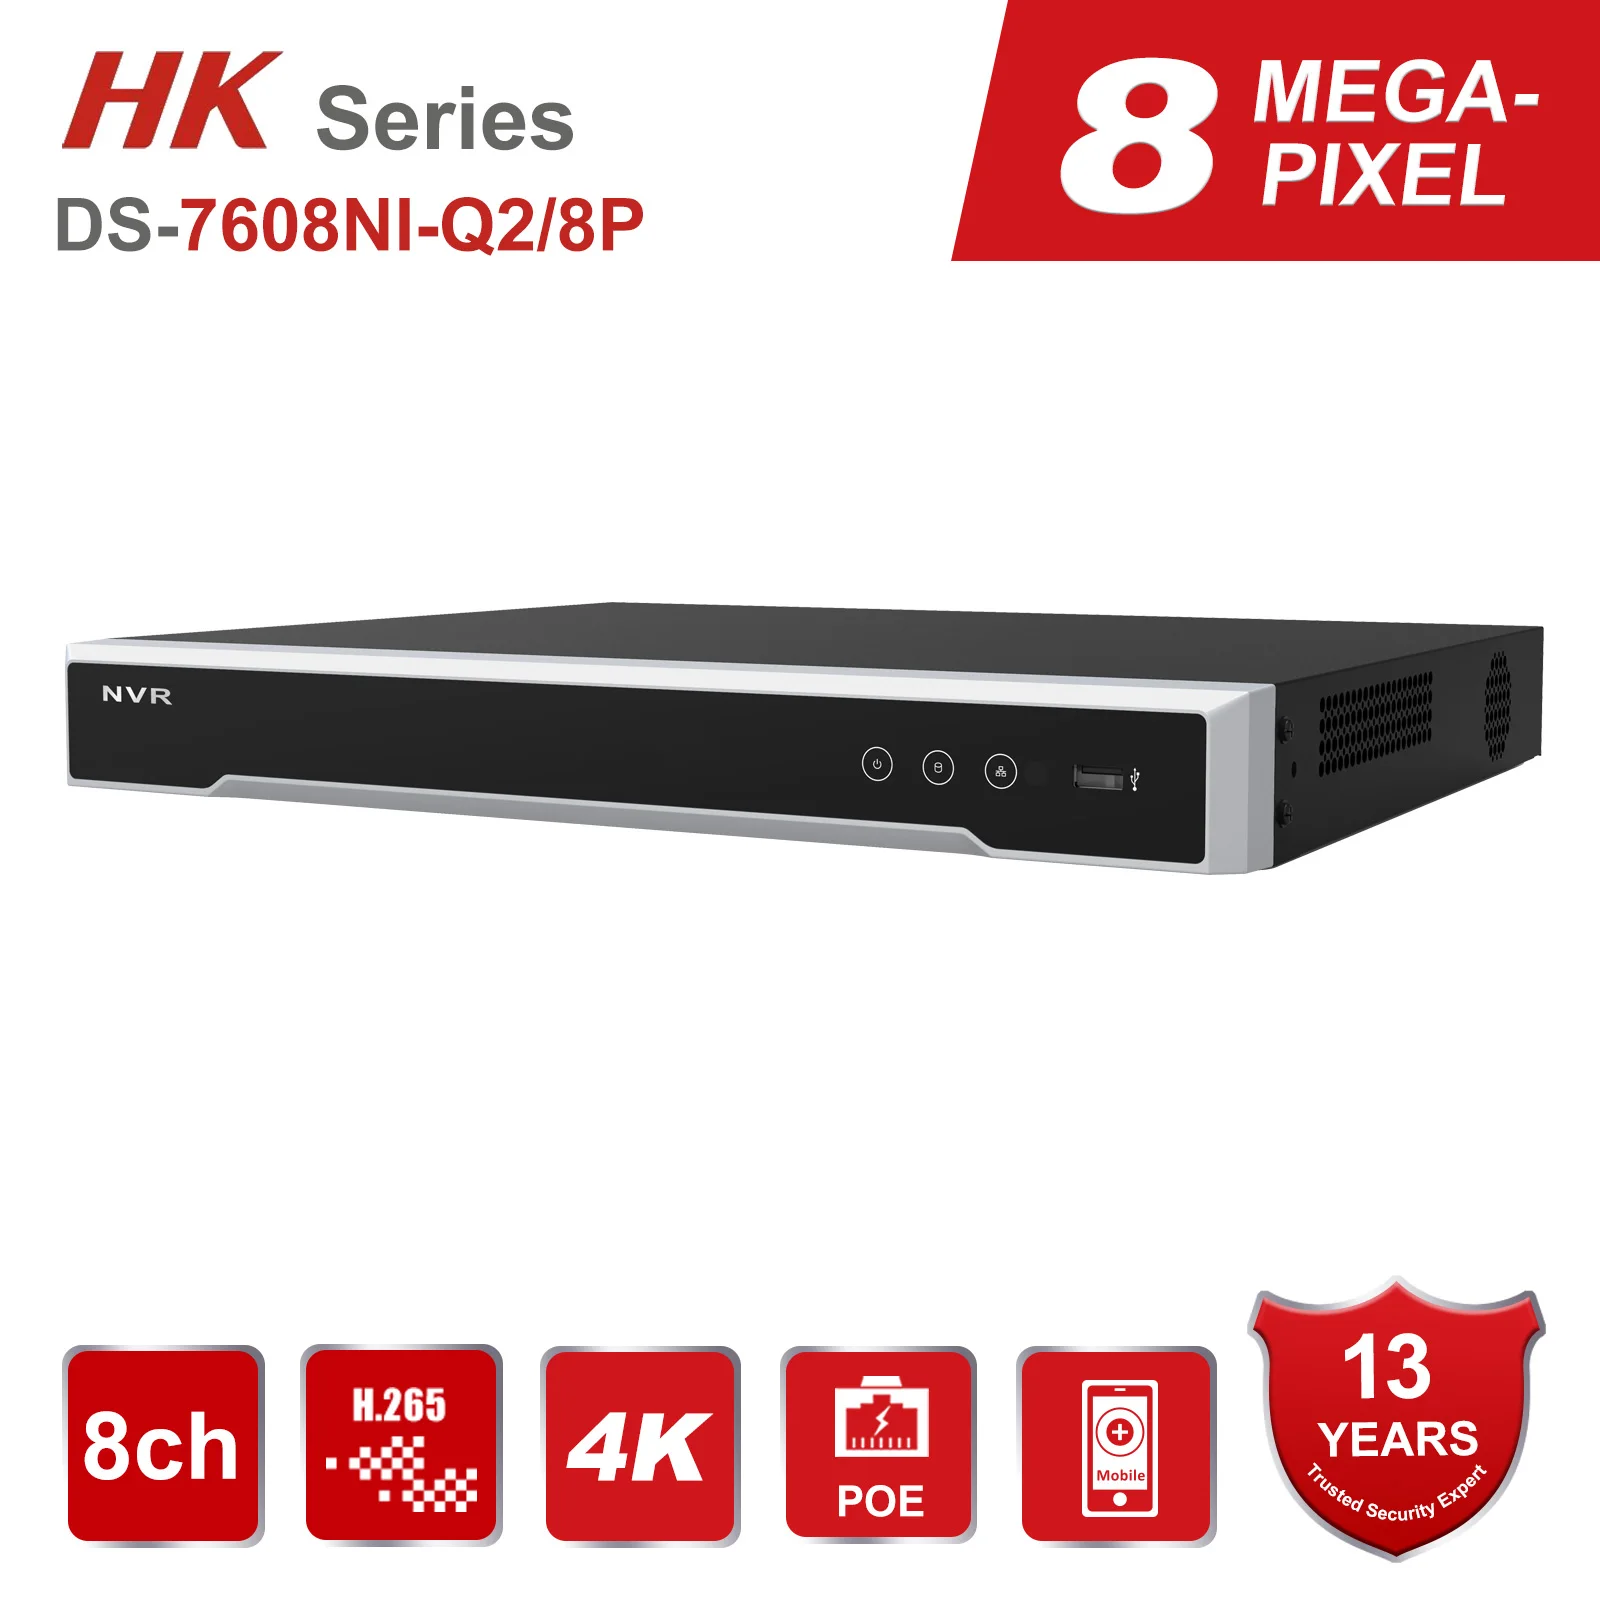 

HK Original 8CH POE NVR H.265+ DS-7608NI-Q2/8P Embedded Plug&Play Network Video Recorder Max Support 8MP Resolution